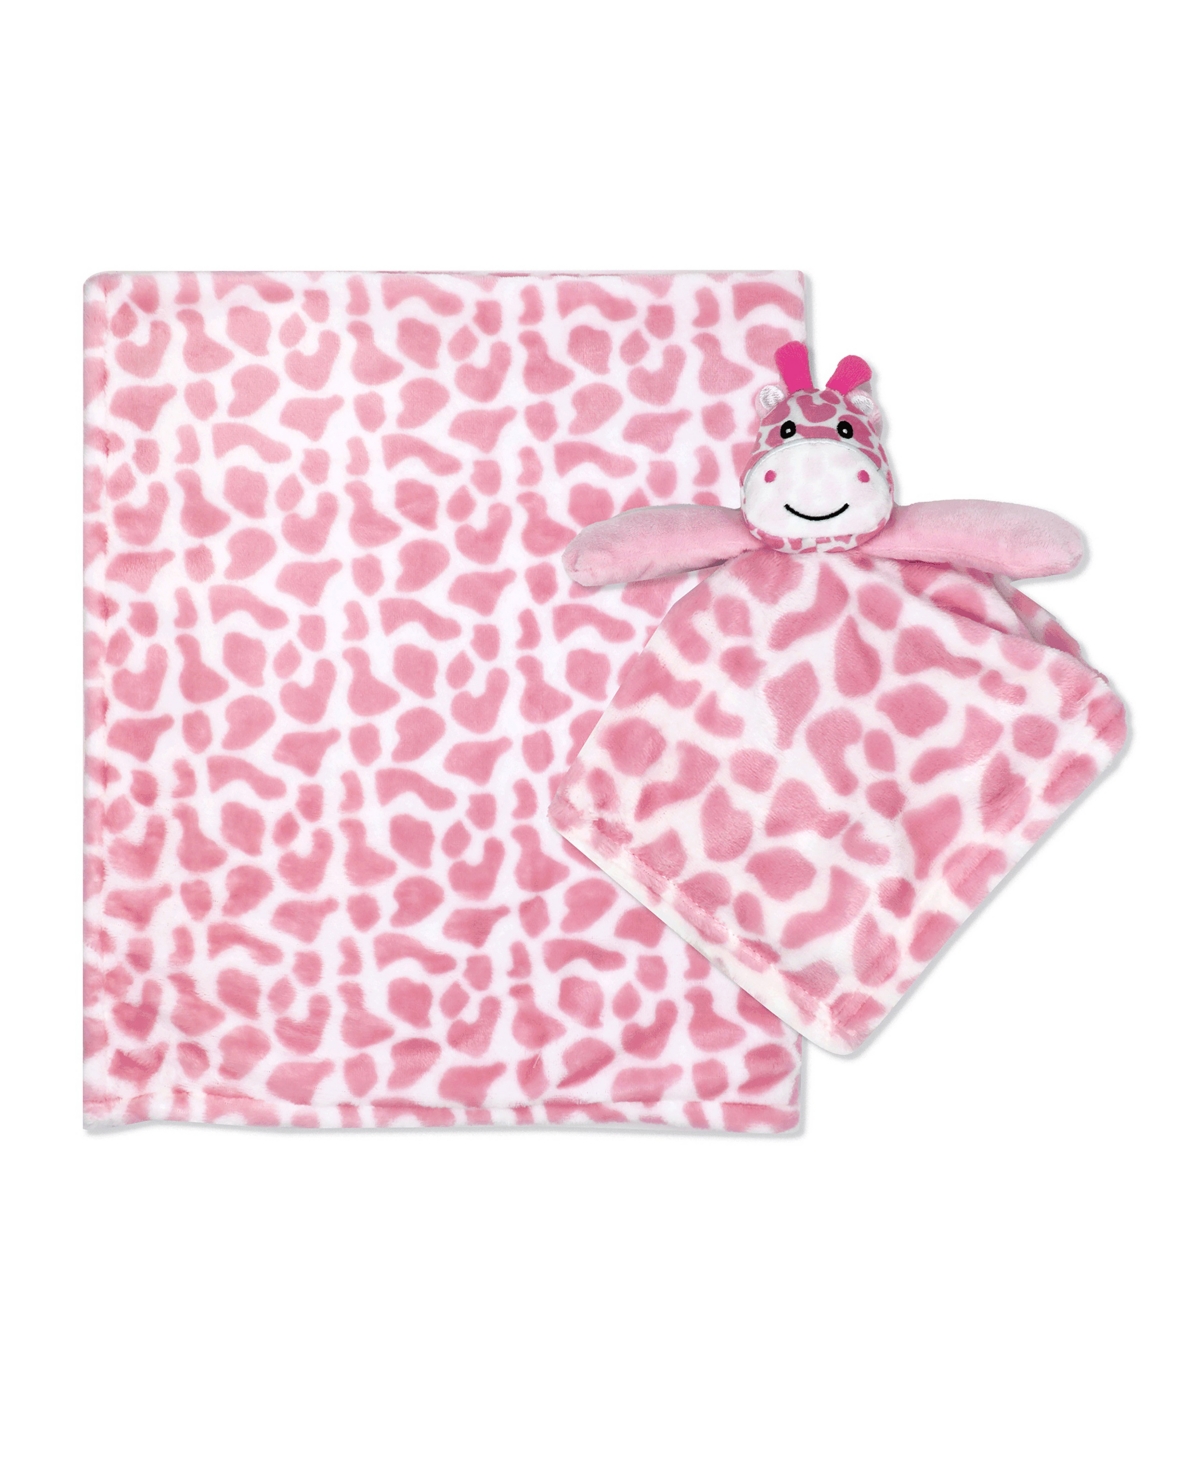 3 Stories Trading Baby Girls Printed Blanket With Nunu, 2 Piece Set In Pink Hearts